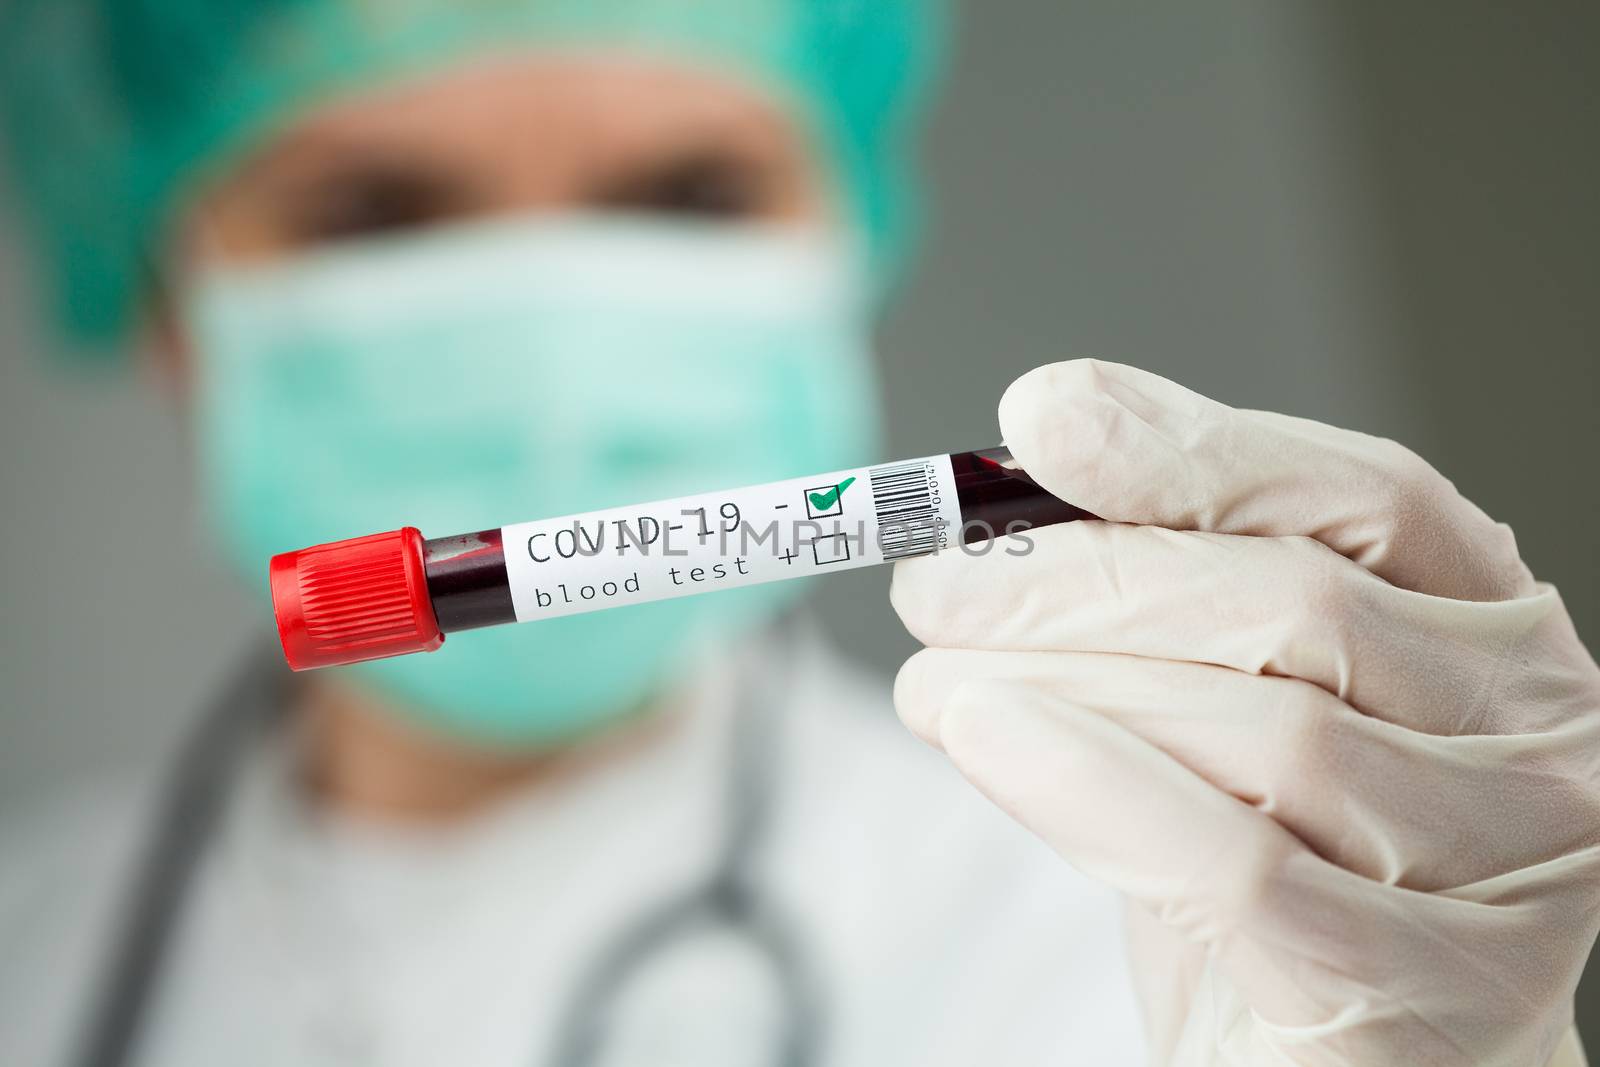 Doctor holding test tube with Coronavirus patient blood sample,NEGATIVE Covid-19 test results,global pandemic crisis, deadly corona virus disease hematology WHO testing procedure illustration concept